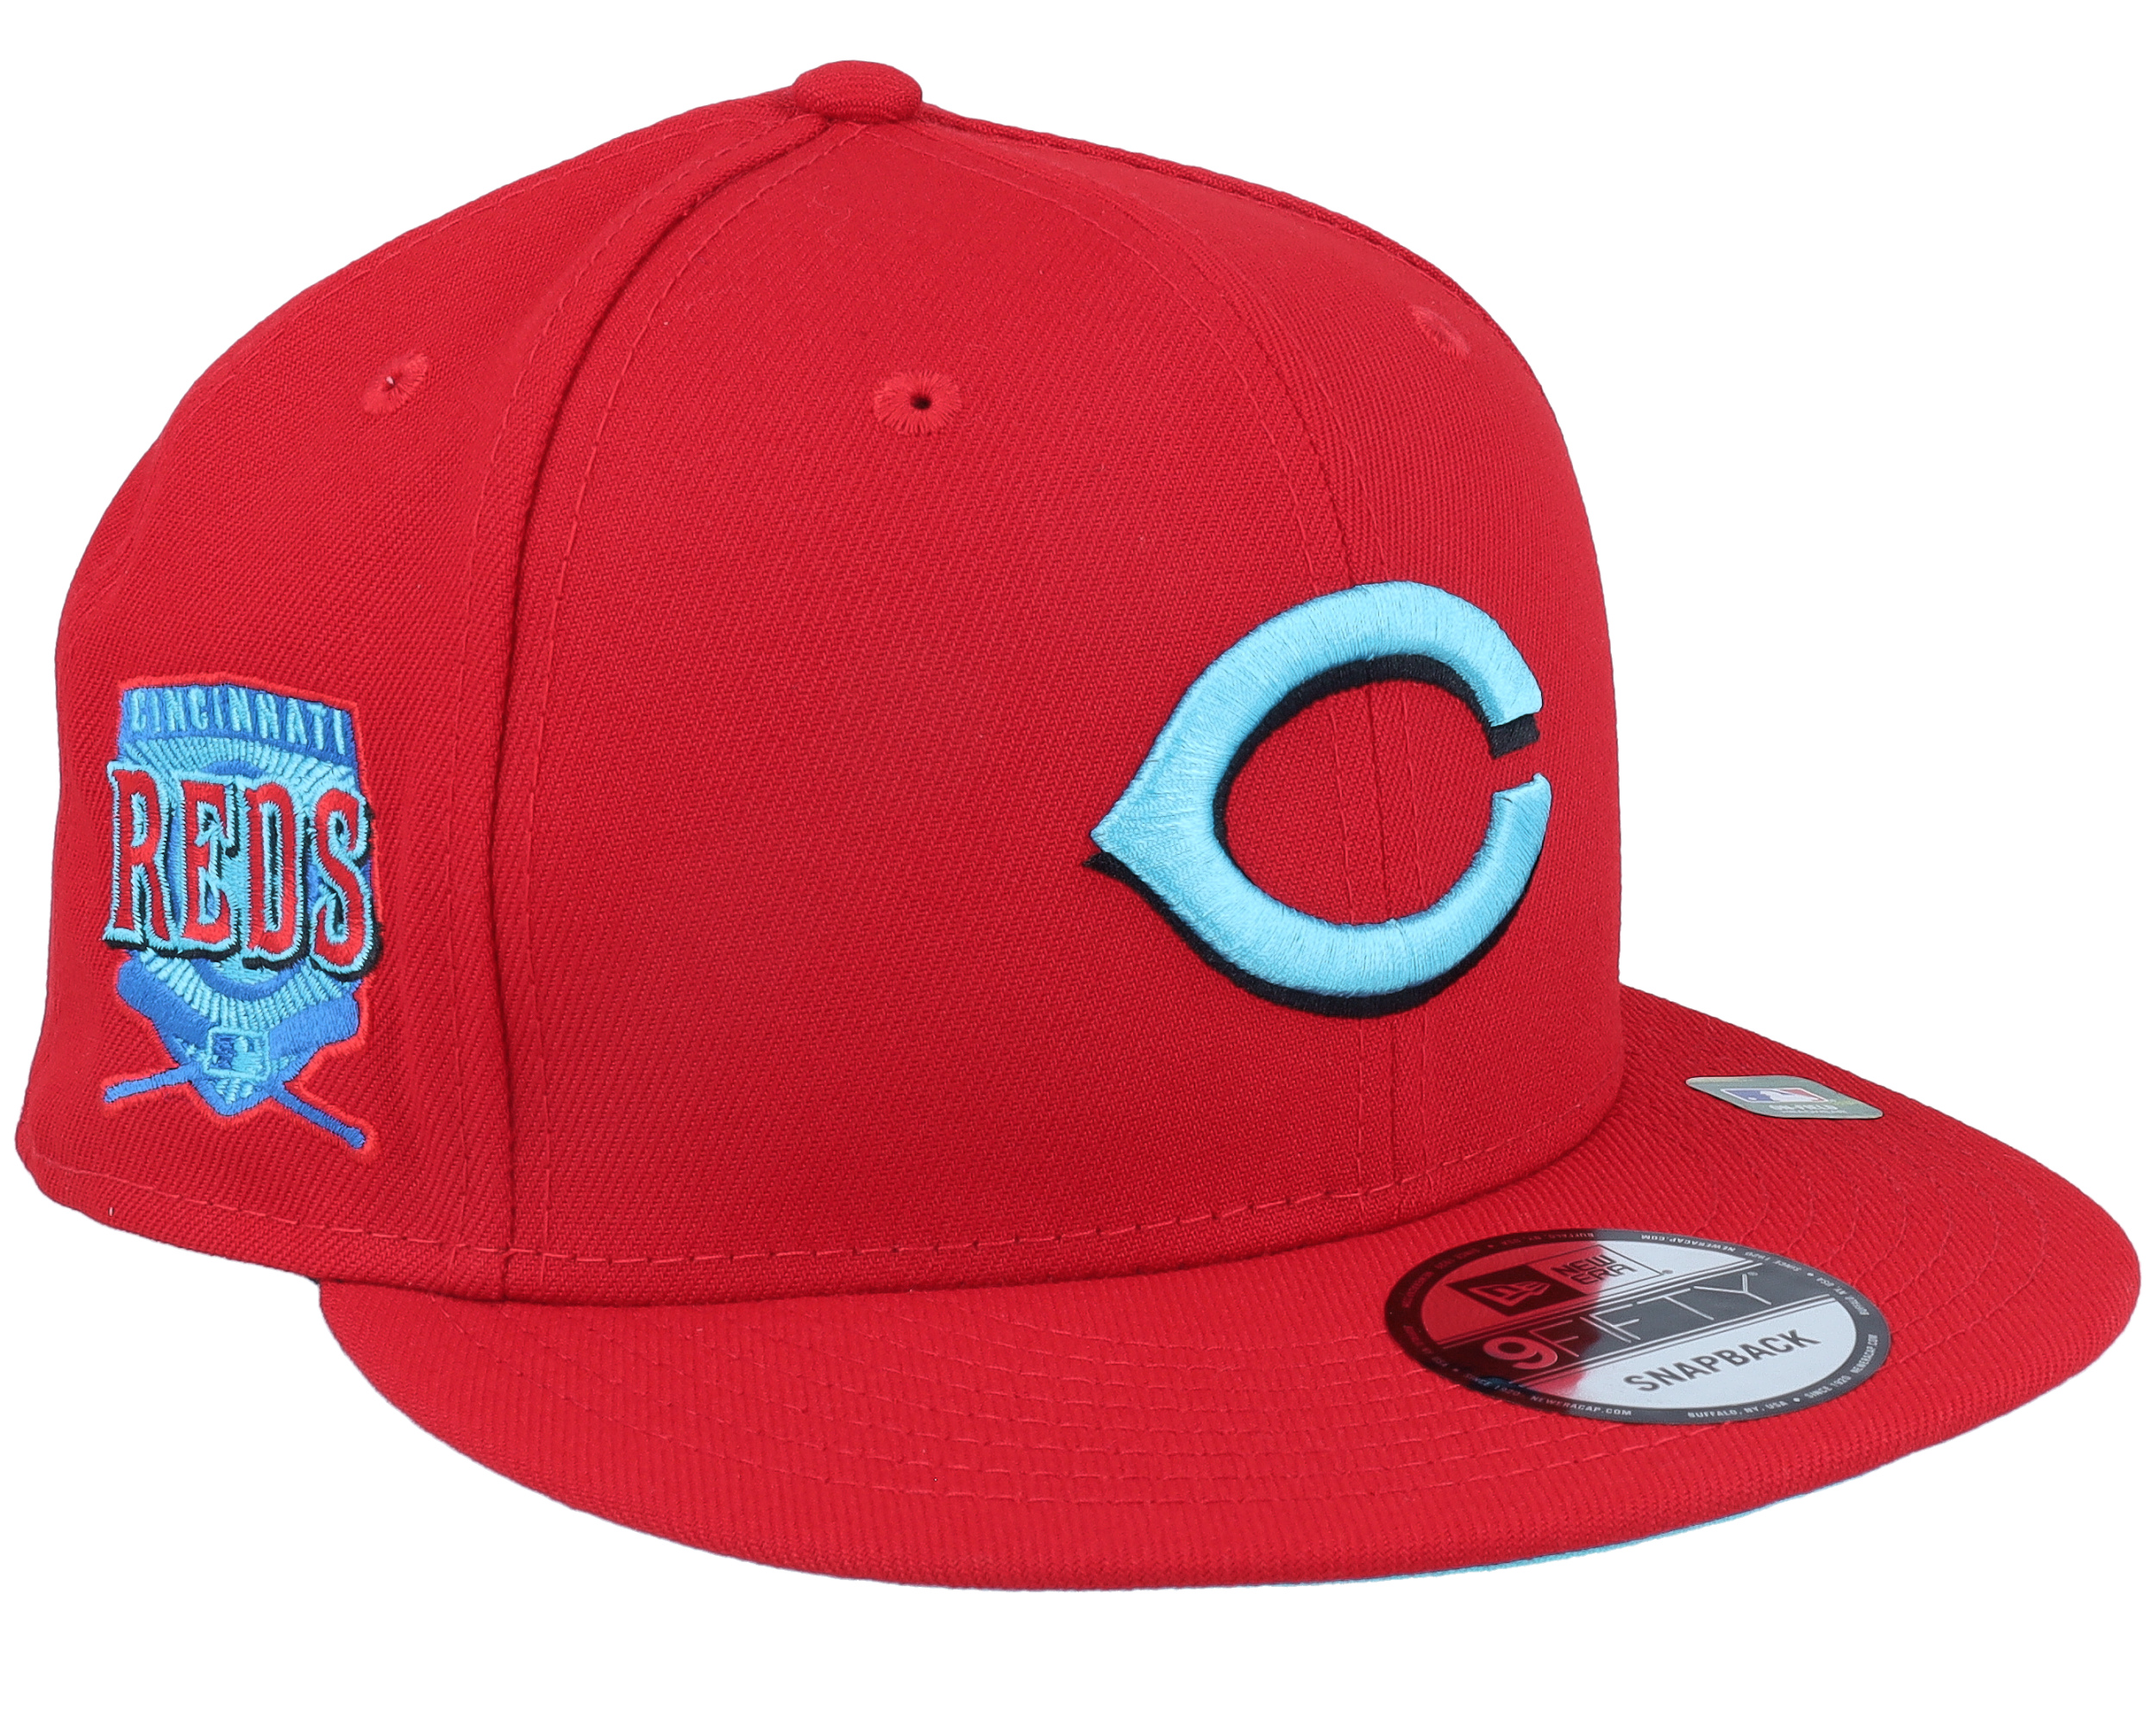 Detroit Red Wings Mitchell & Ness Vintage Paintbrush Snapback Hat